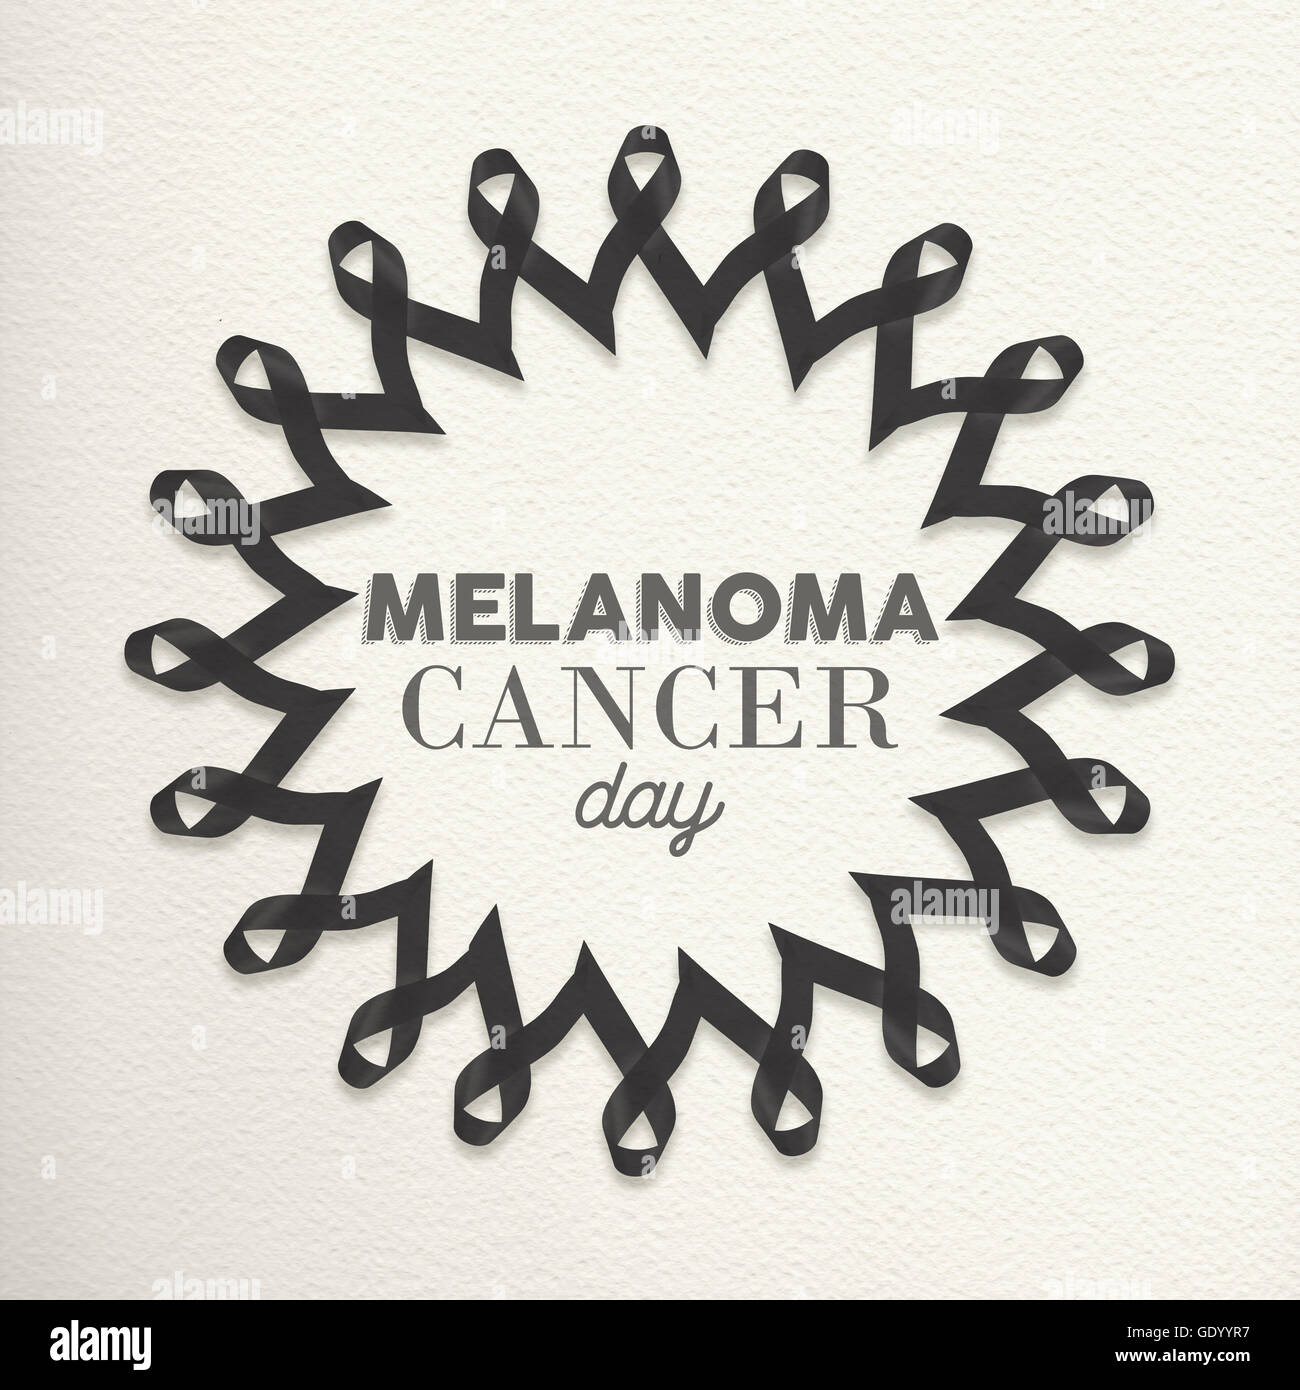 Melanoma cancer day mandala design made of black ribbons with typography for awareness support. Stock Photo